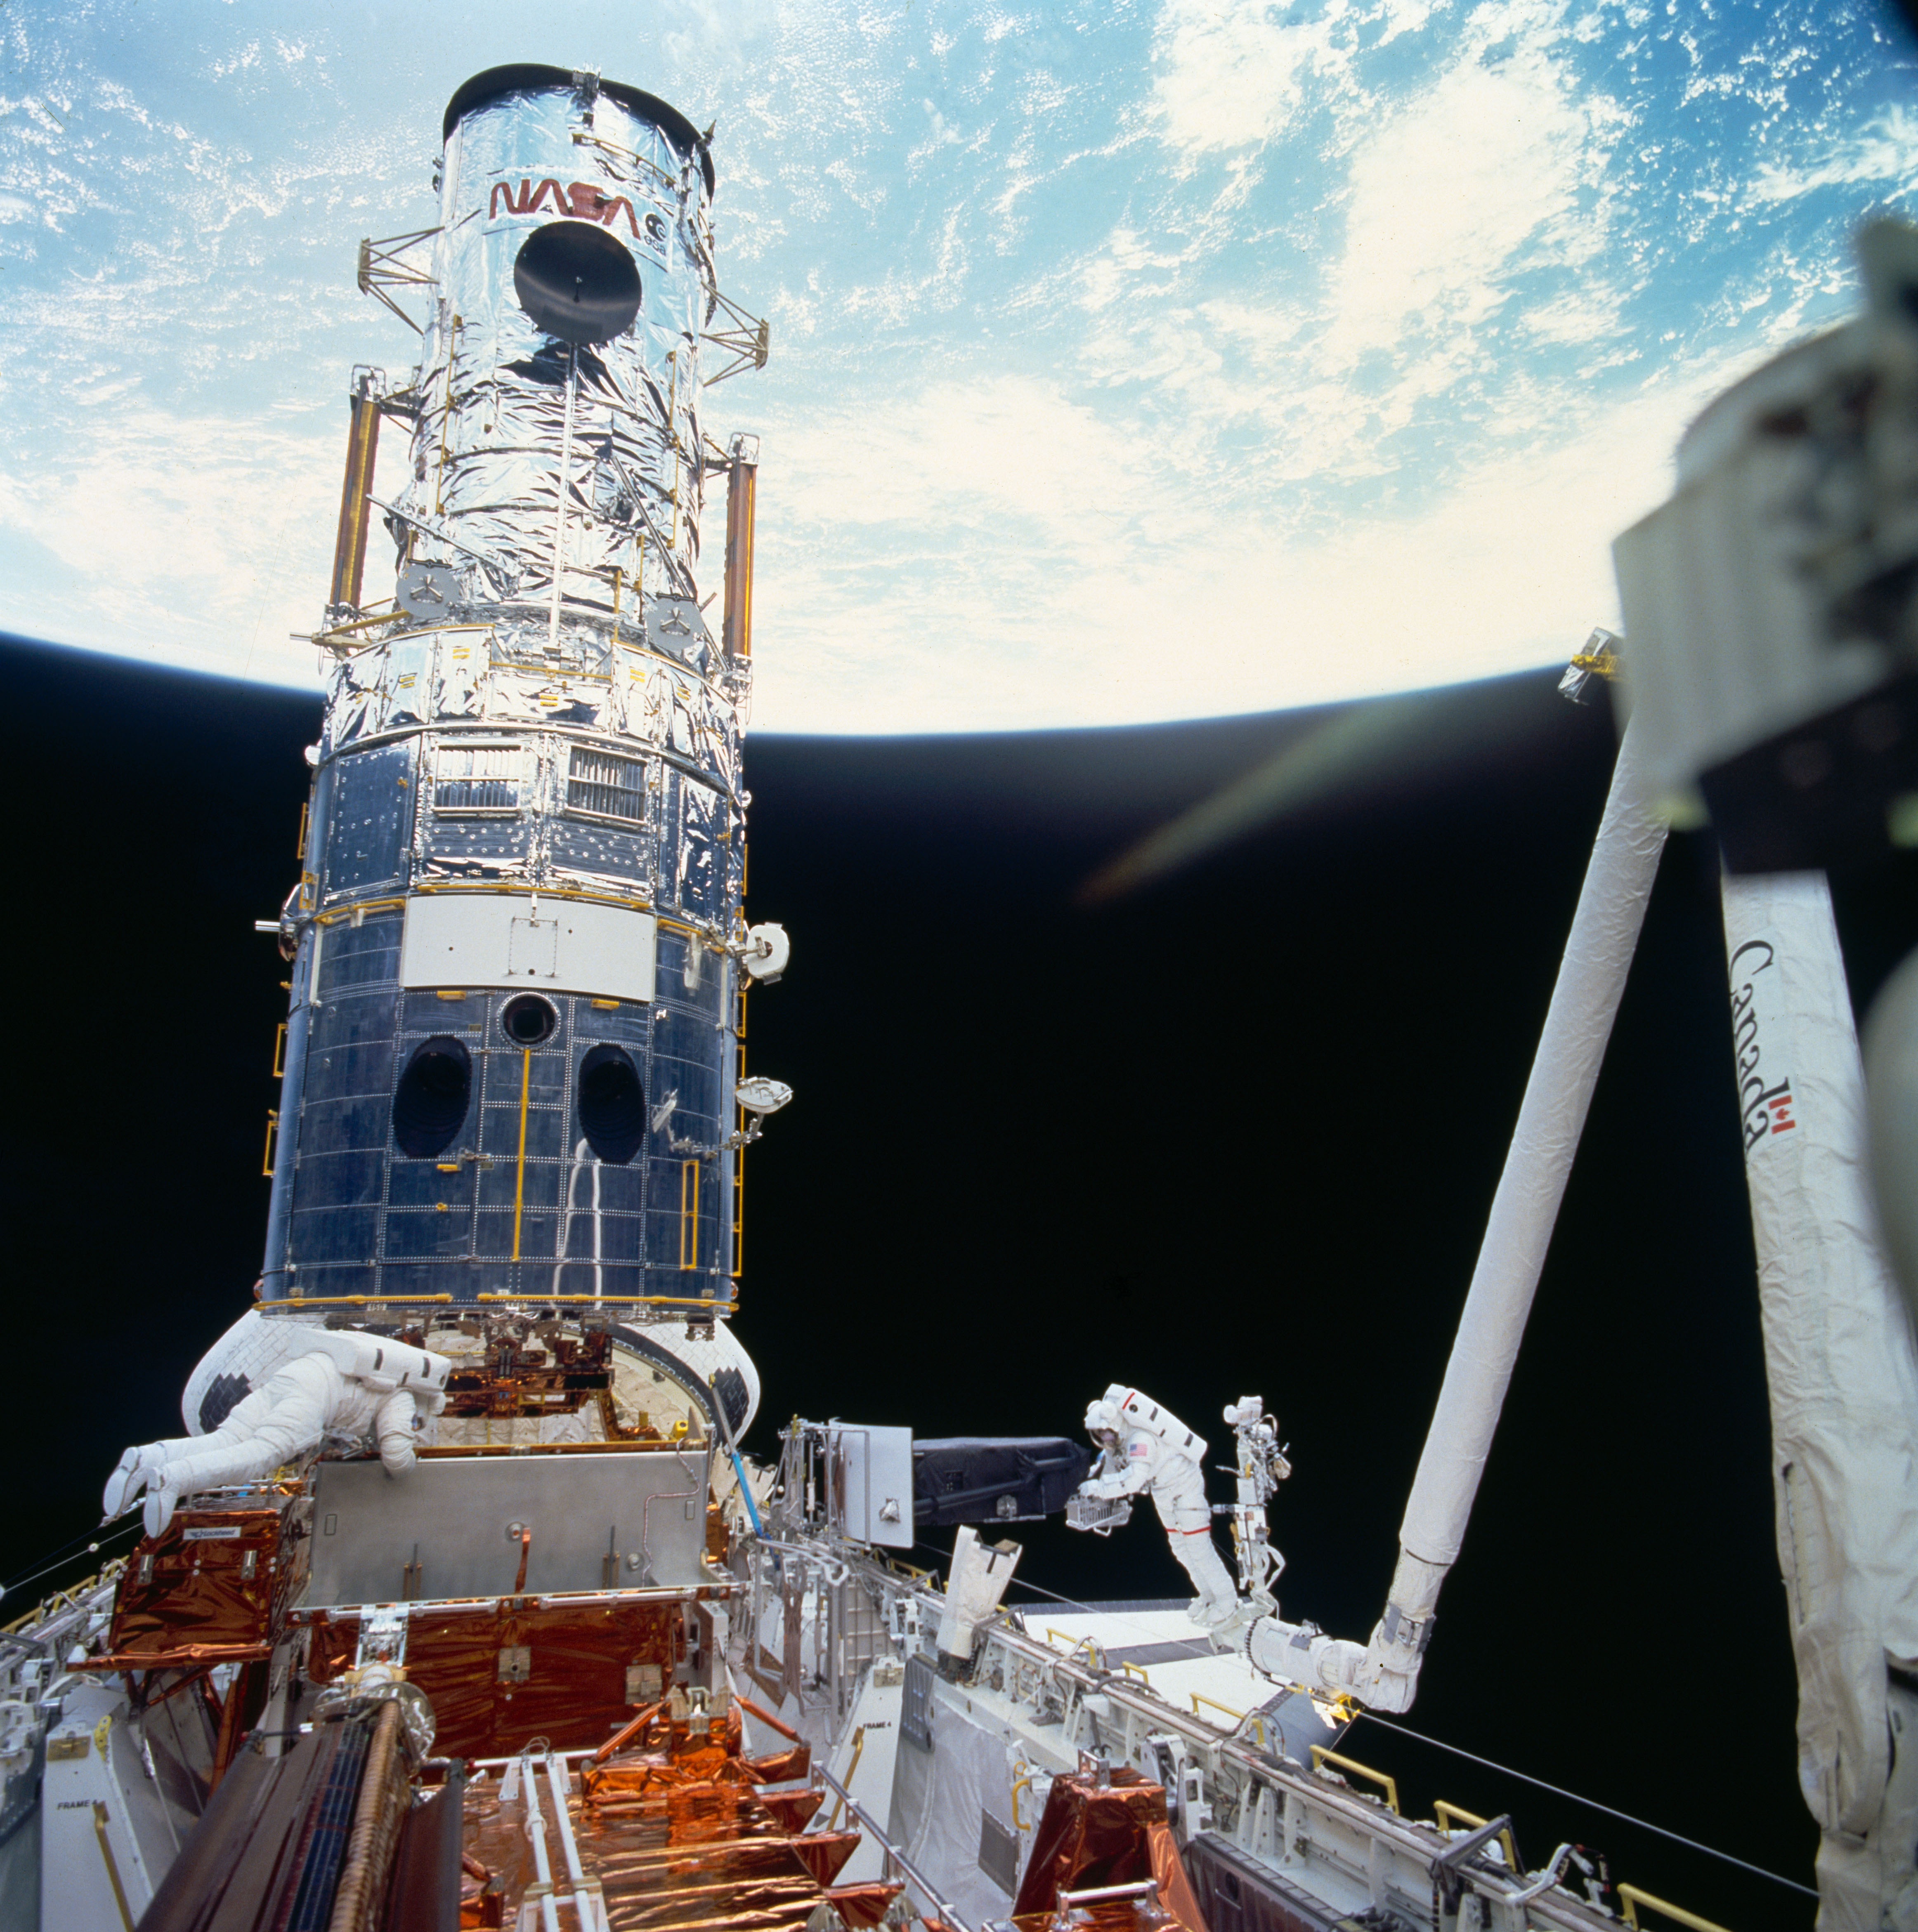 Musgrave, left, and Hoffman have installed WFPC2, the white triangle in the middle of the telescope, with Hoffman about to pick up WFPC1 temporarily stowed on the side of the payload bay and place it in its permanent location for return to Earth